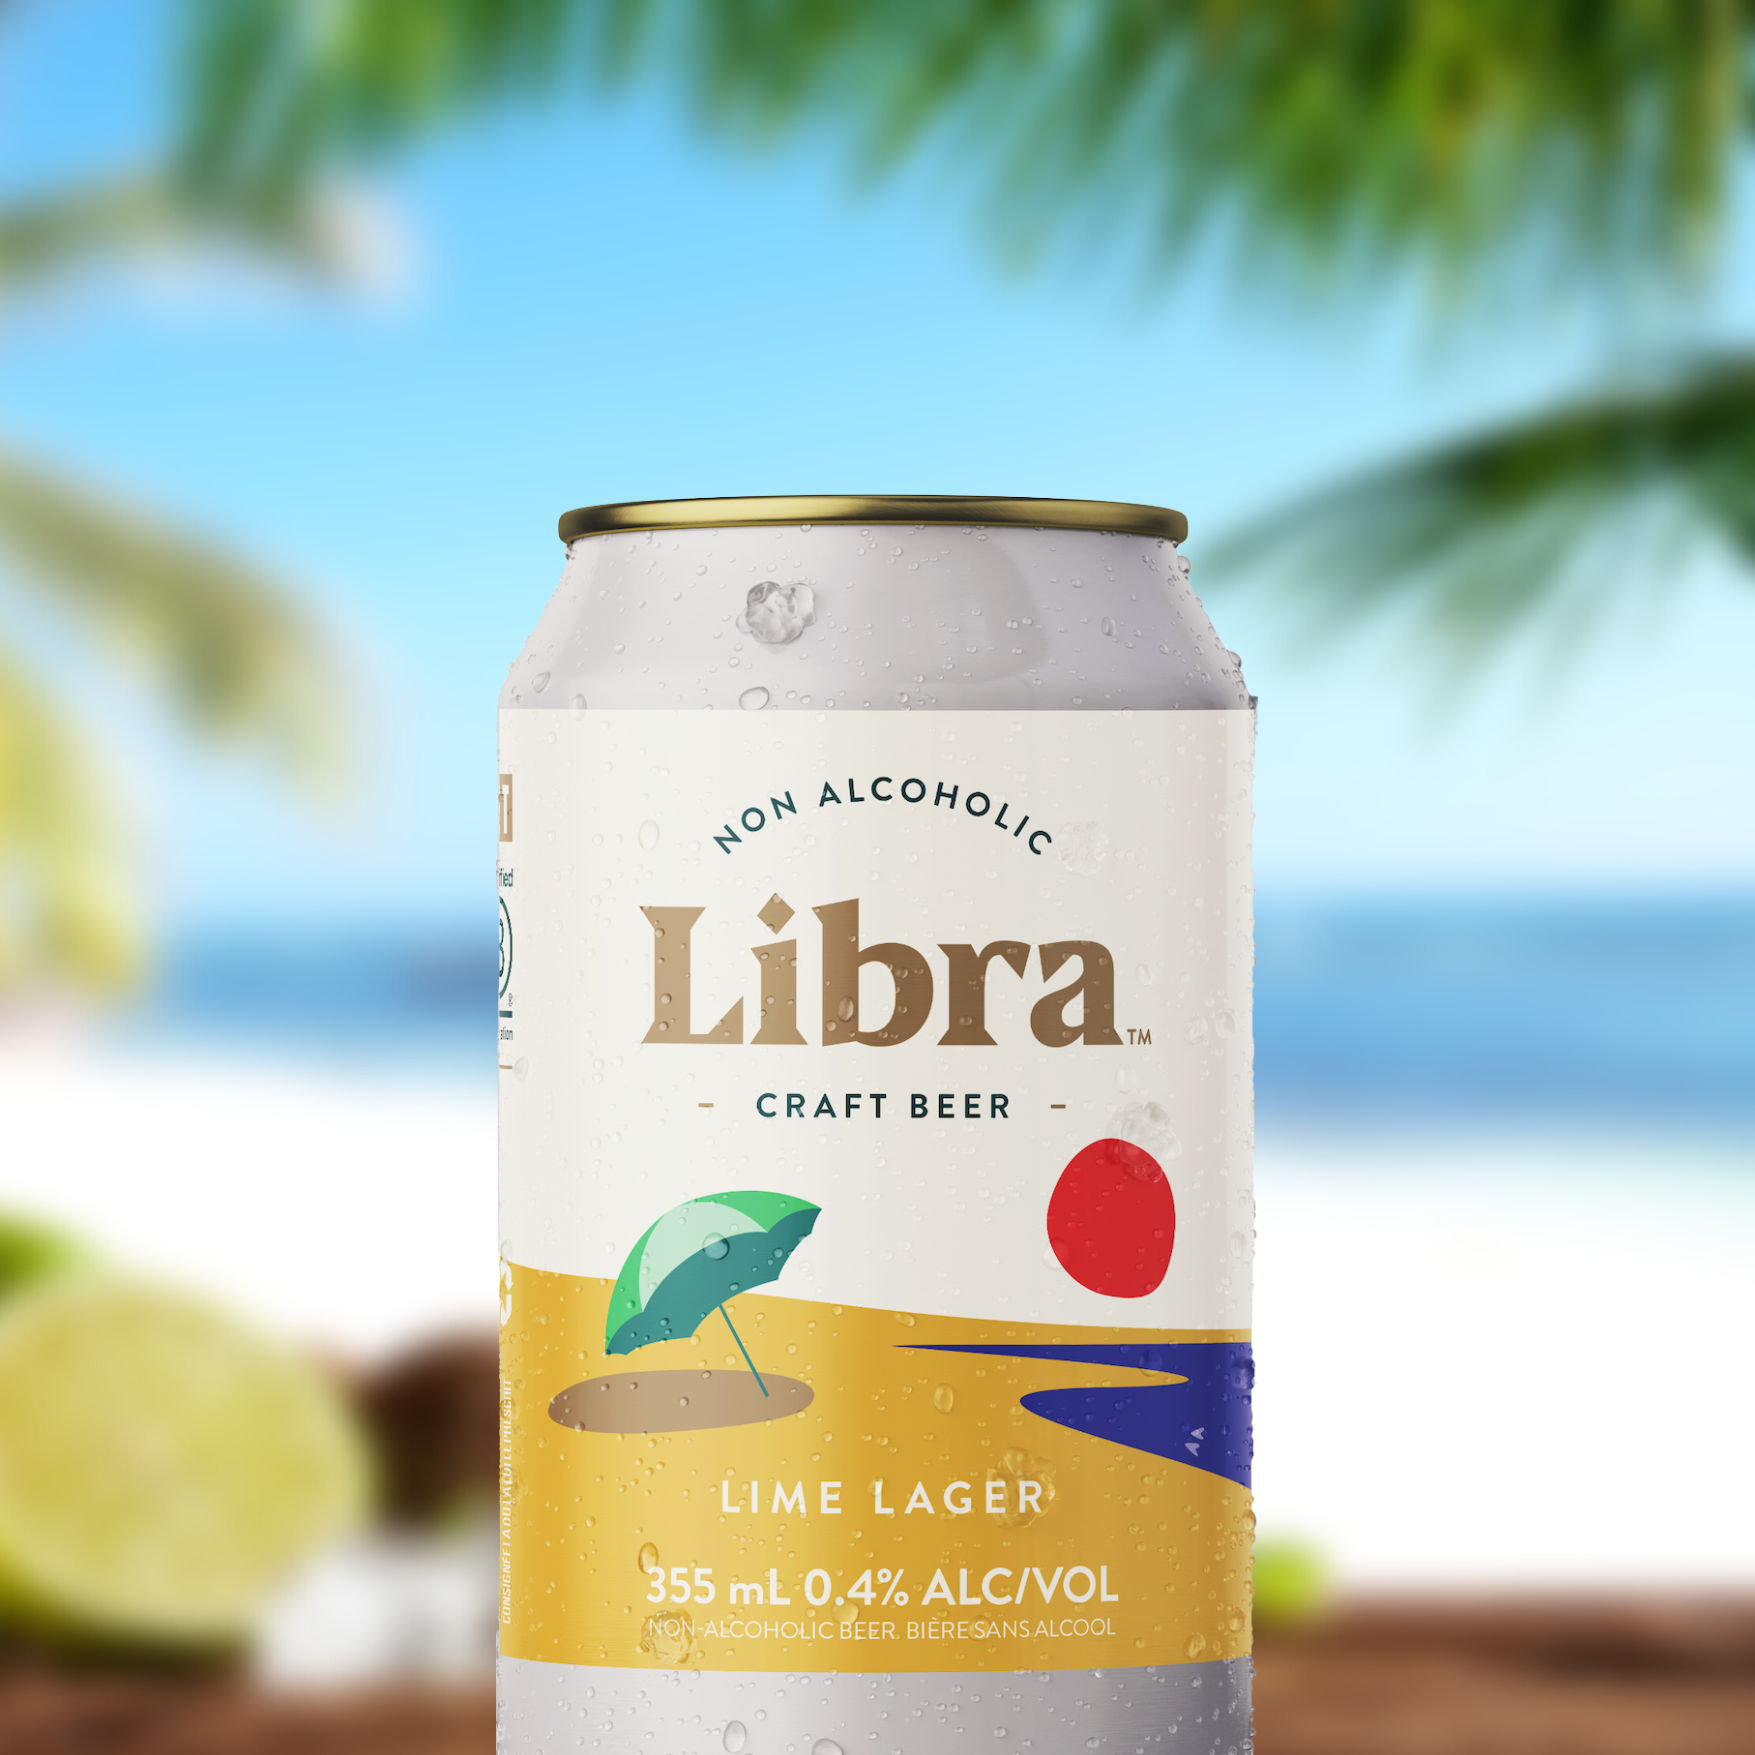 A new refreshing brew for summer ☀